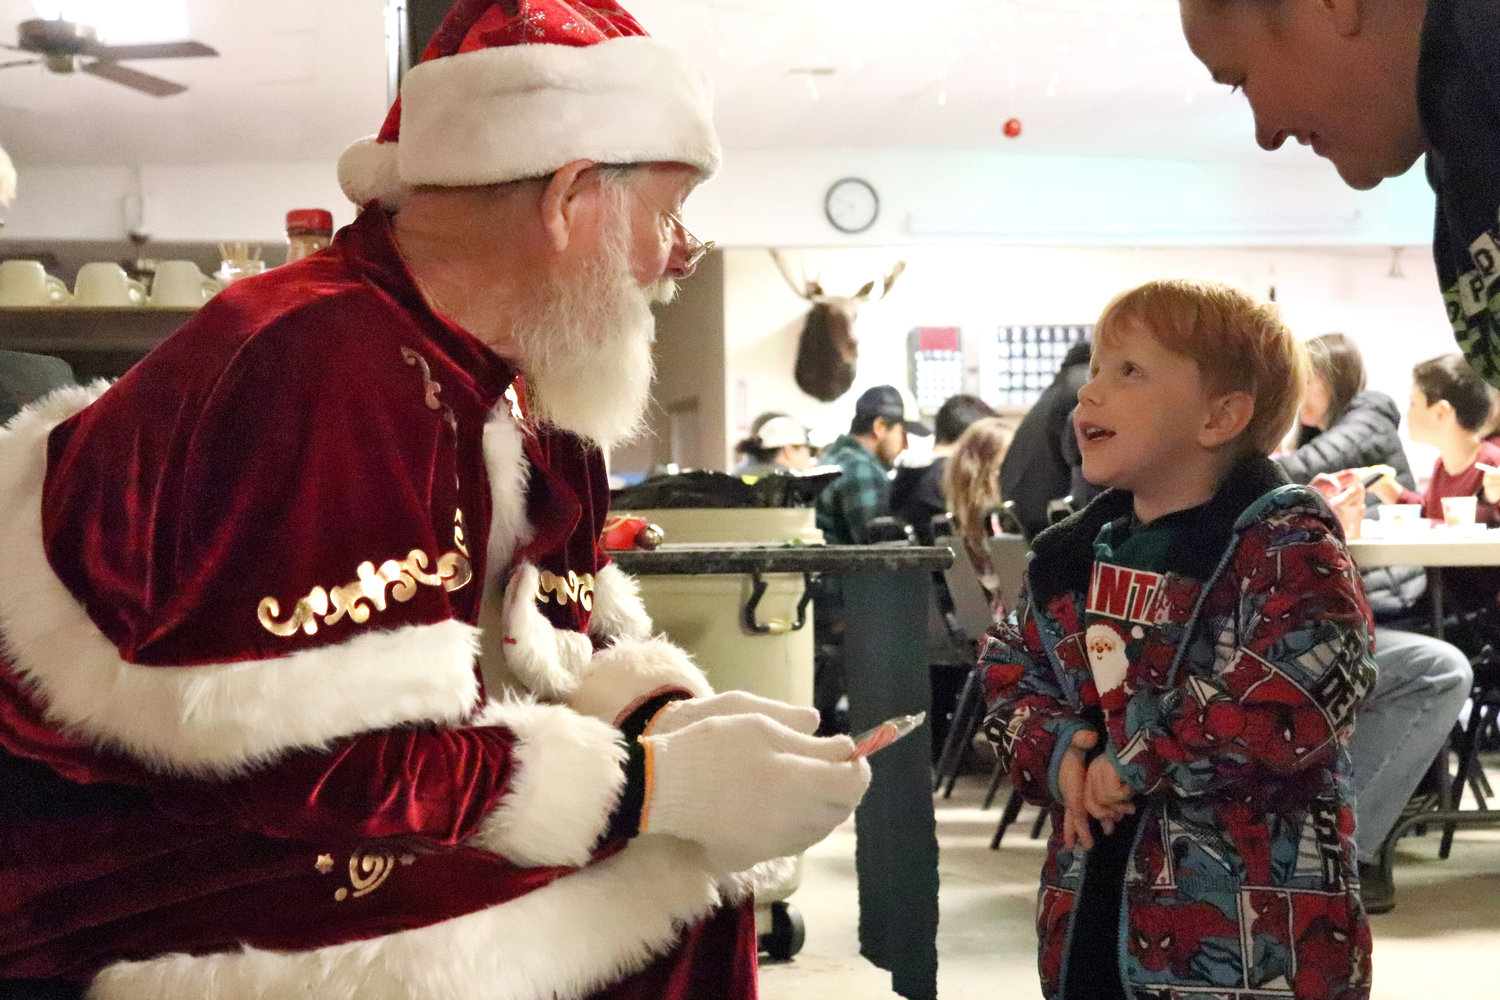 Three-year-old Ryan talks to Santa during a Breakfast with Santa event at the Moose Family Center in Centralia on Saturday.